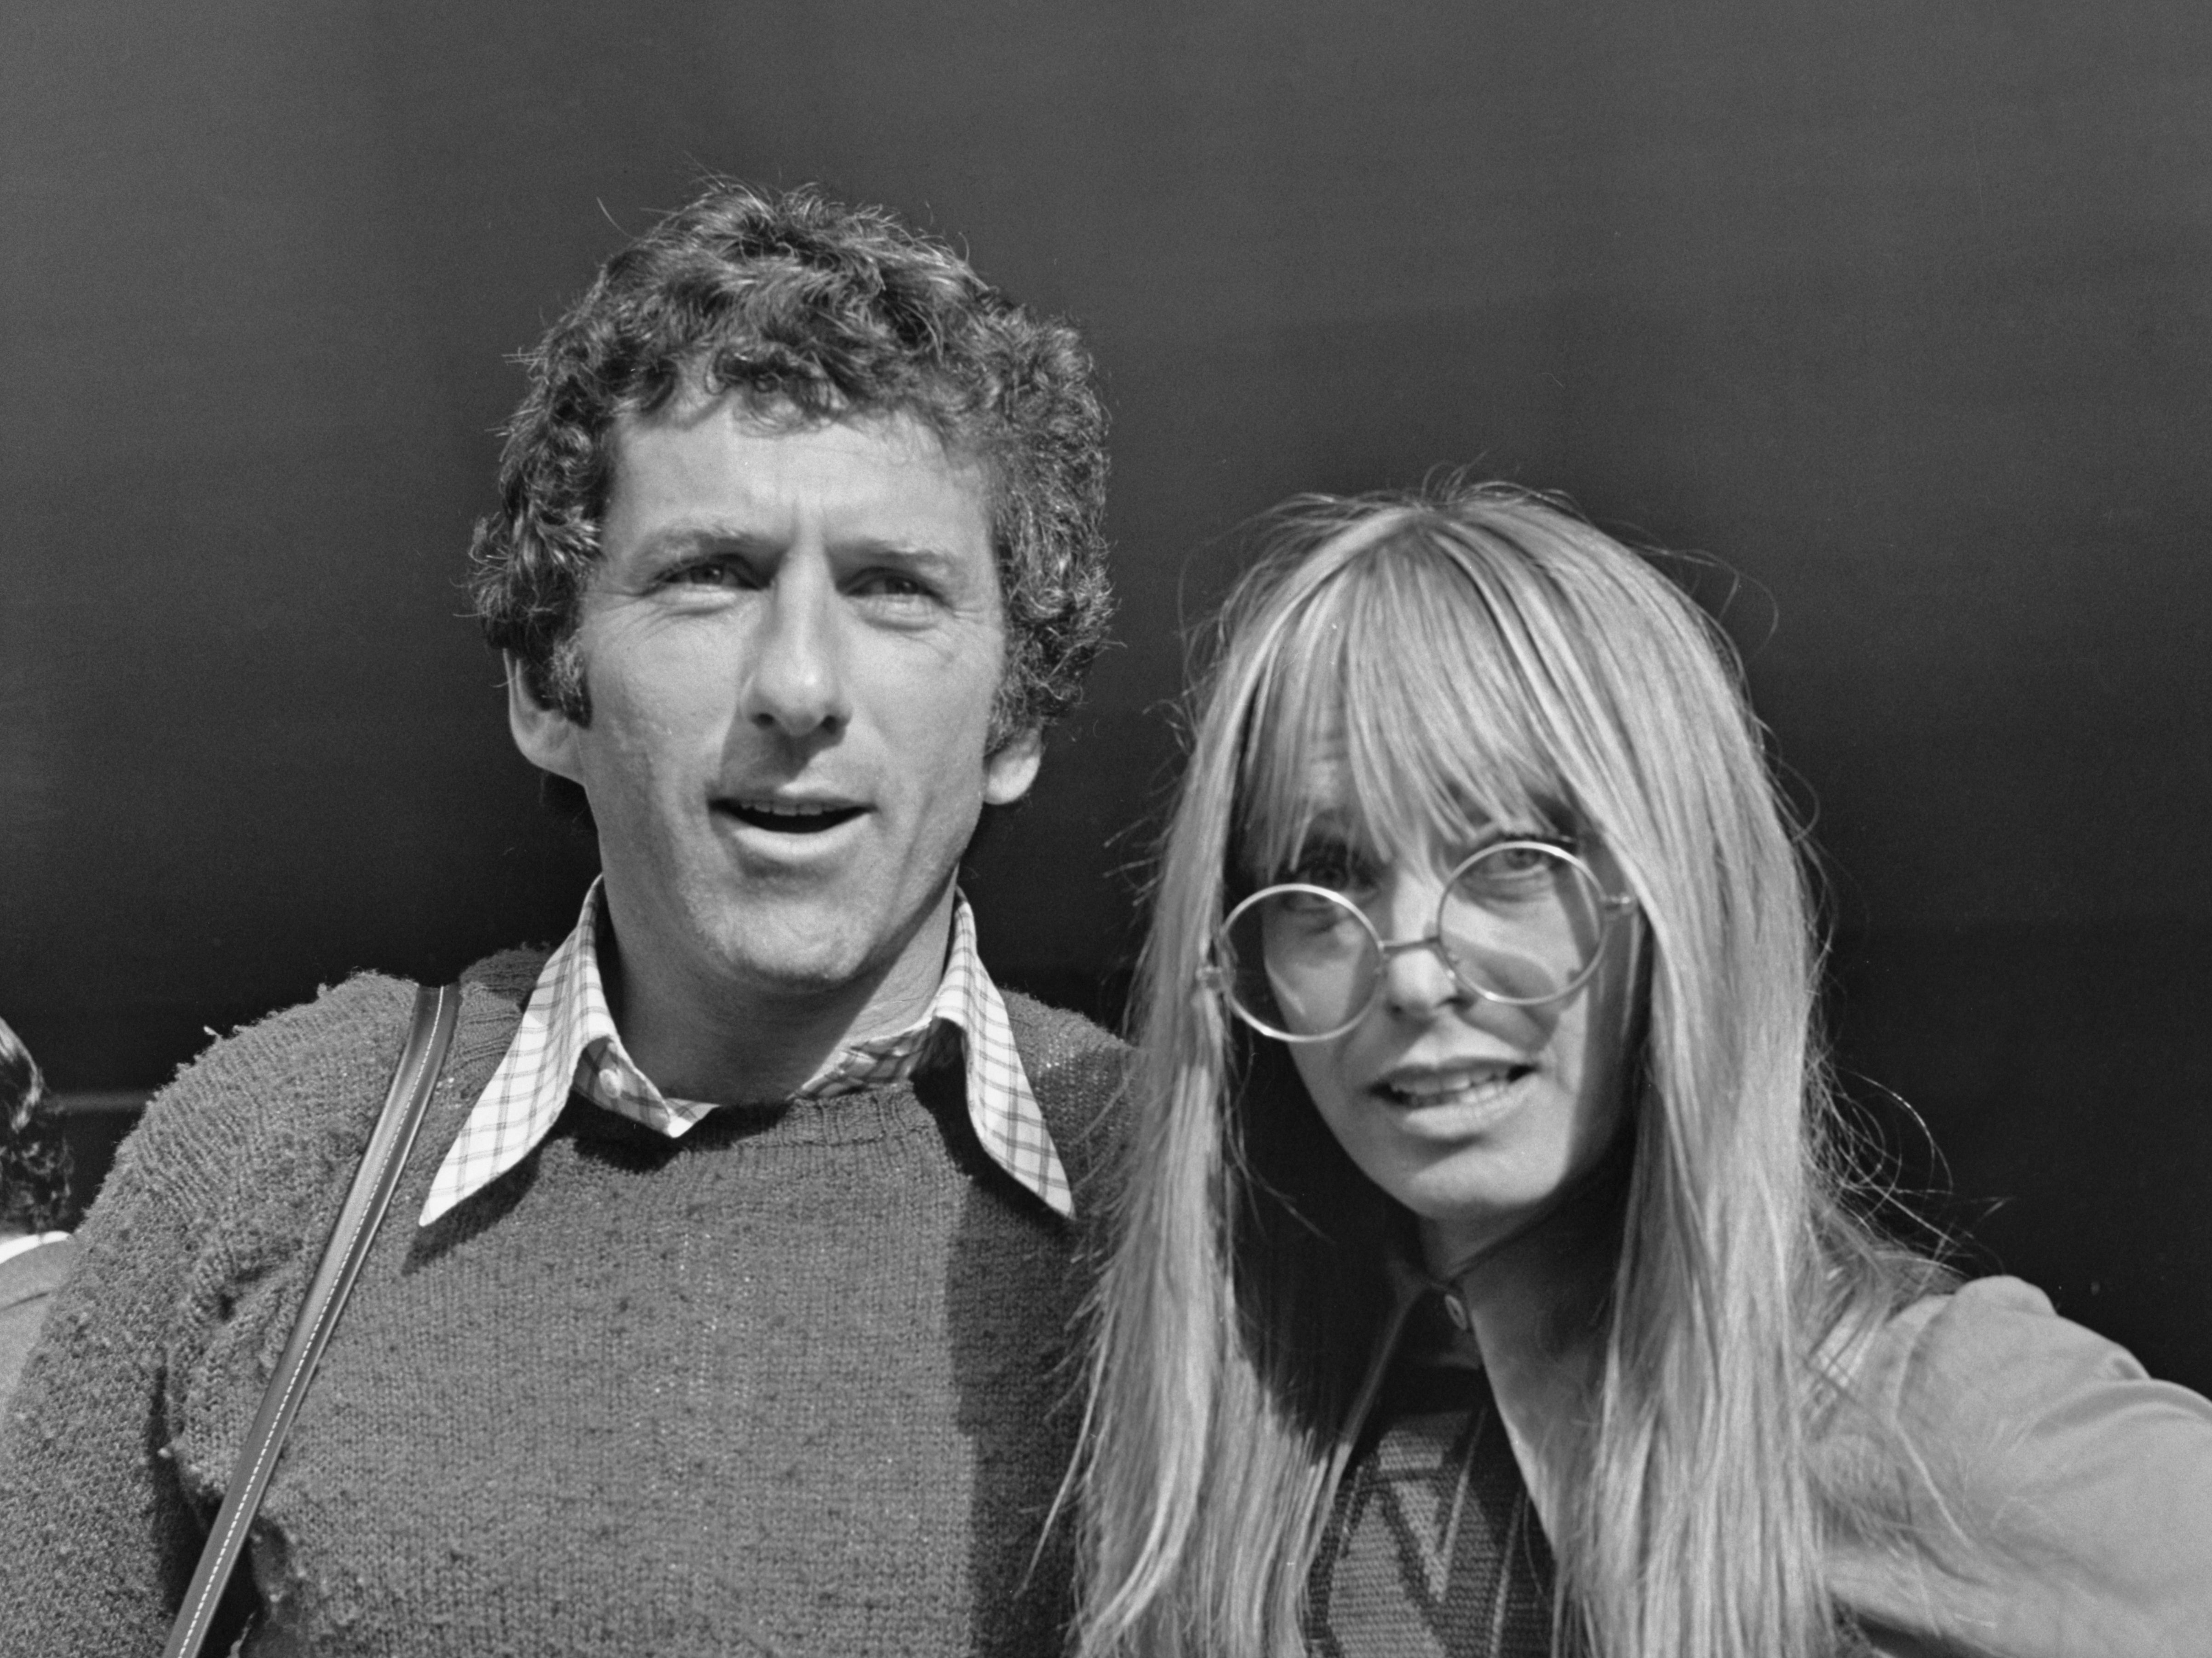 American actor Barry Newman (left) and English actor Suzy Kendall (right)